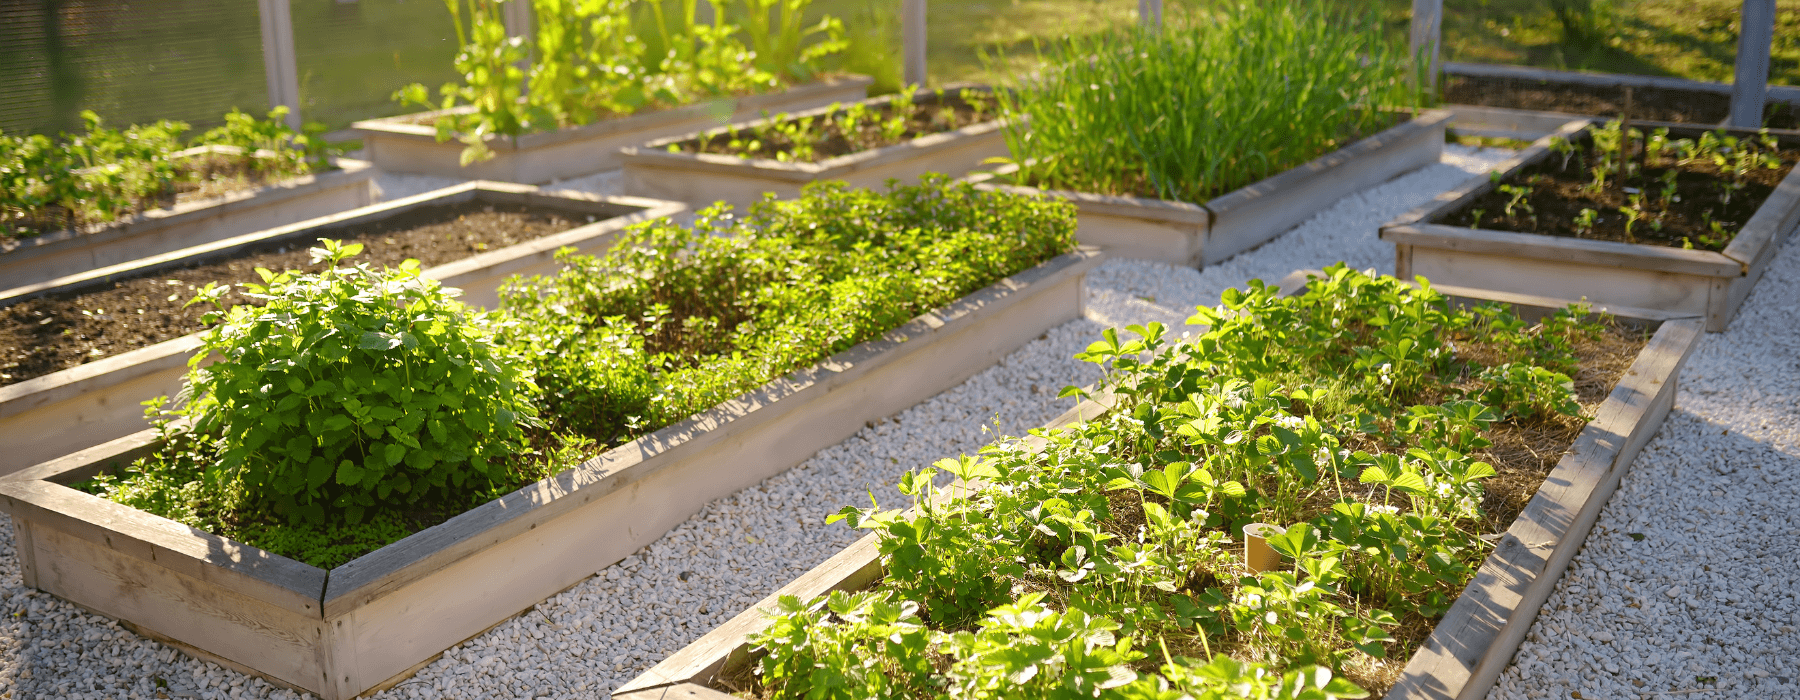 Raised garden beds with various herbs and vegetables growing in a community garden.